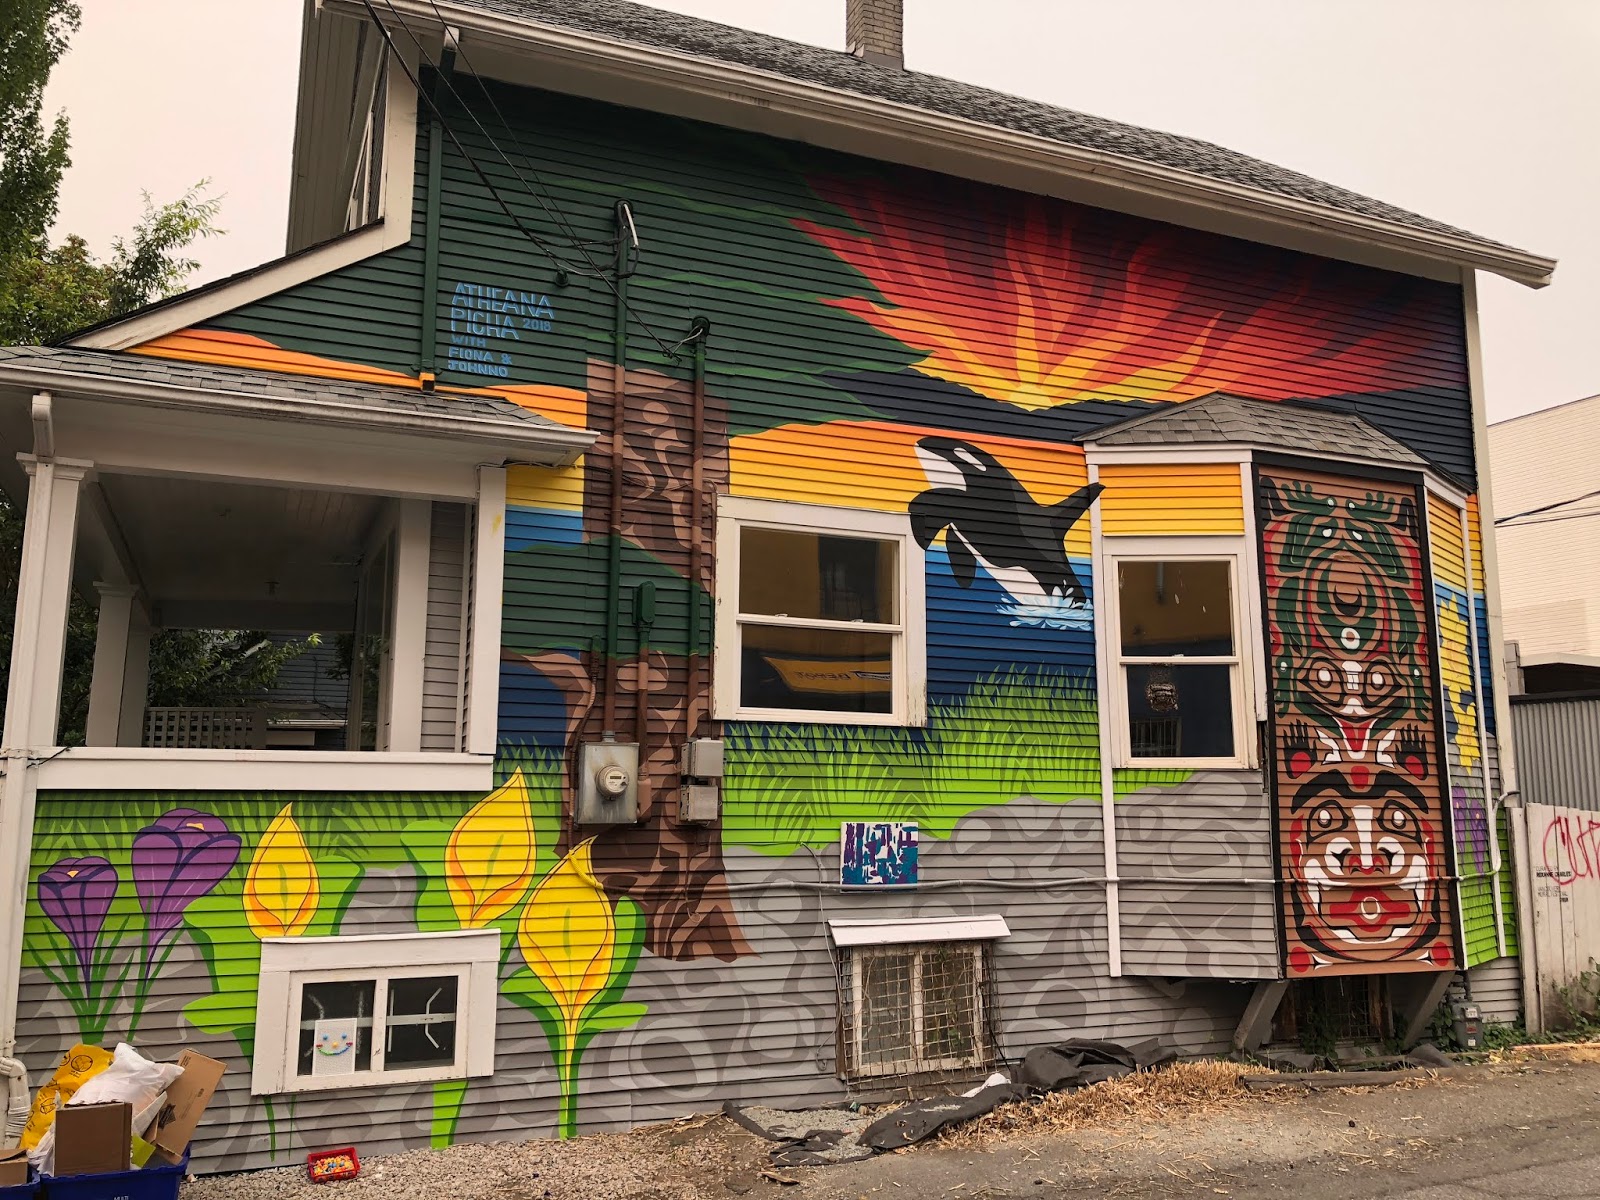 Of Smoke and Murals and Skunk Cabbage -- Just a Walk in the 'Hood